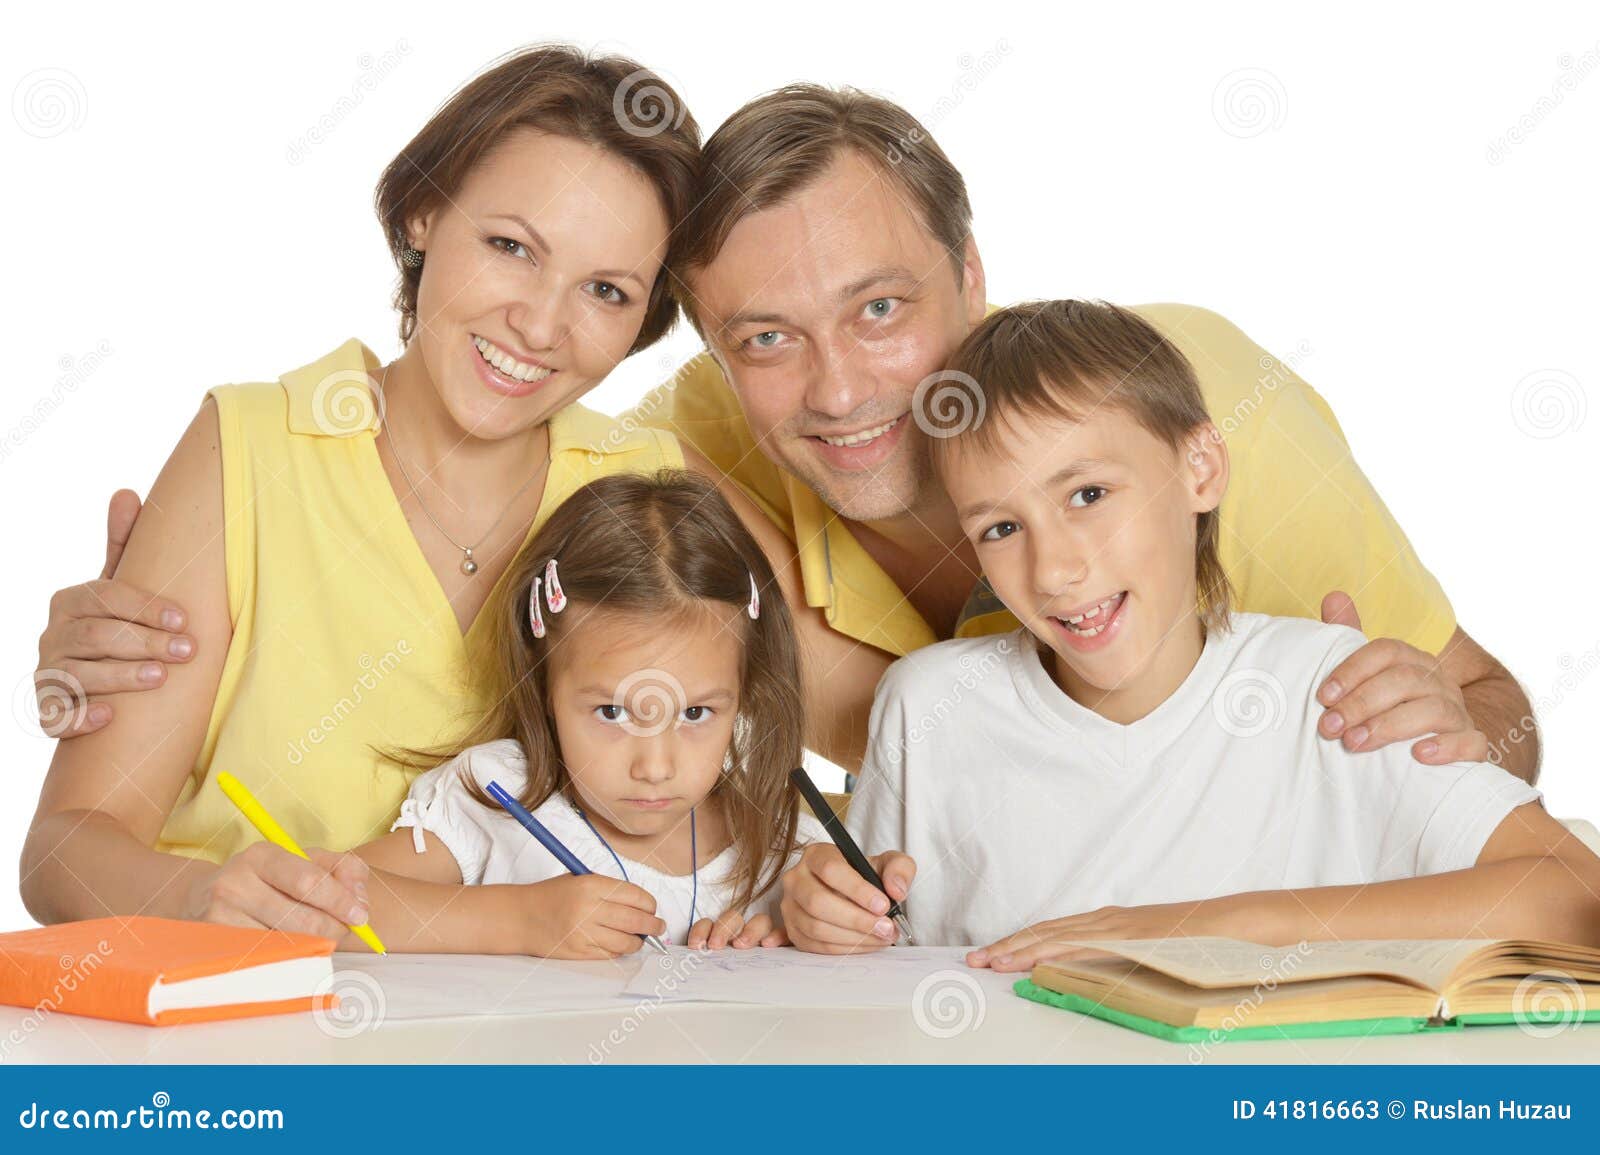 homework takes a lot of family time